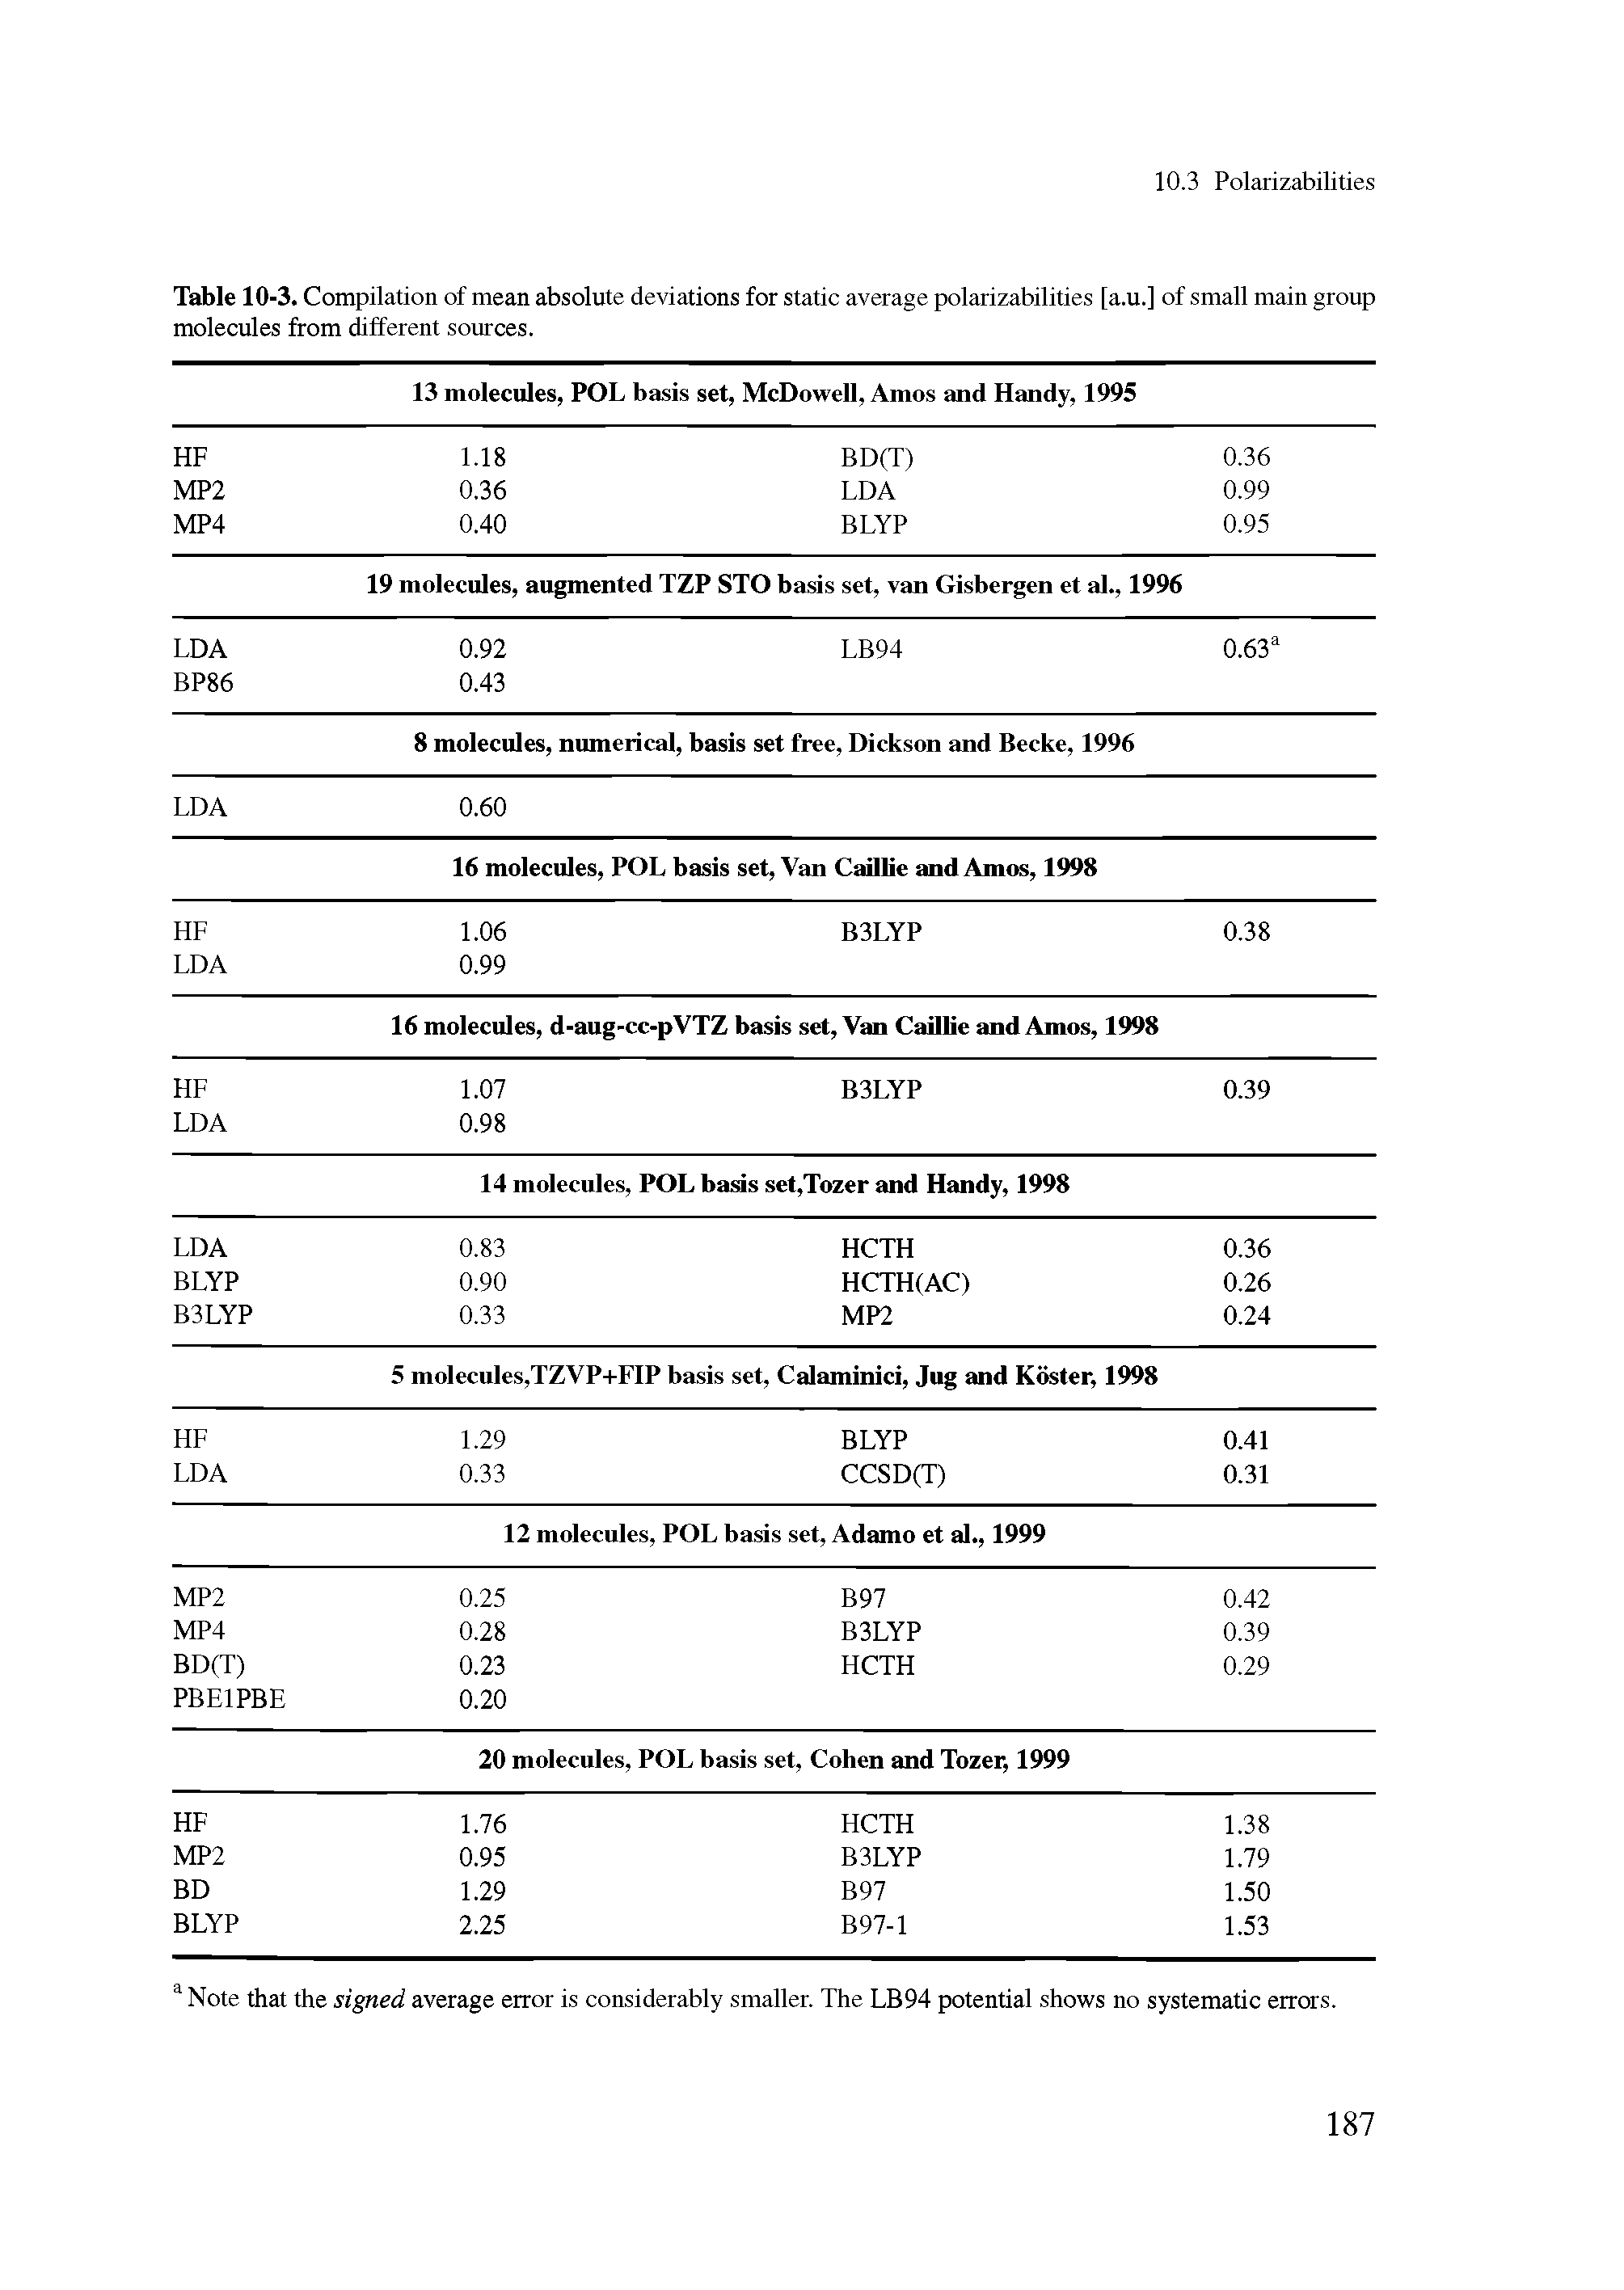 Table 10-3. Compilation of mean absolute deviations for static average polarizabilities [a.u.] of small main group molecules from different sources.